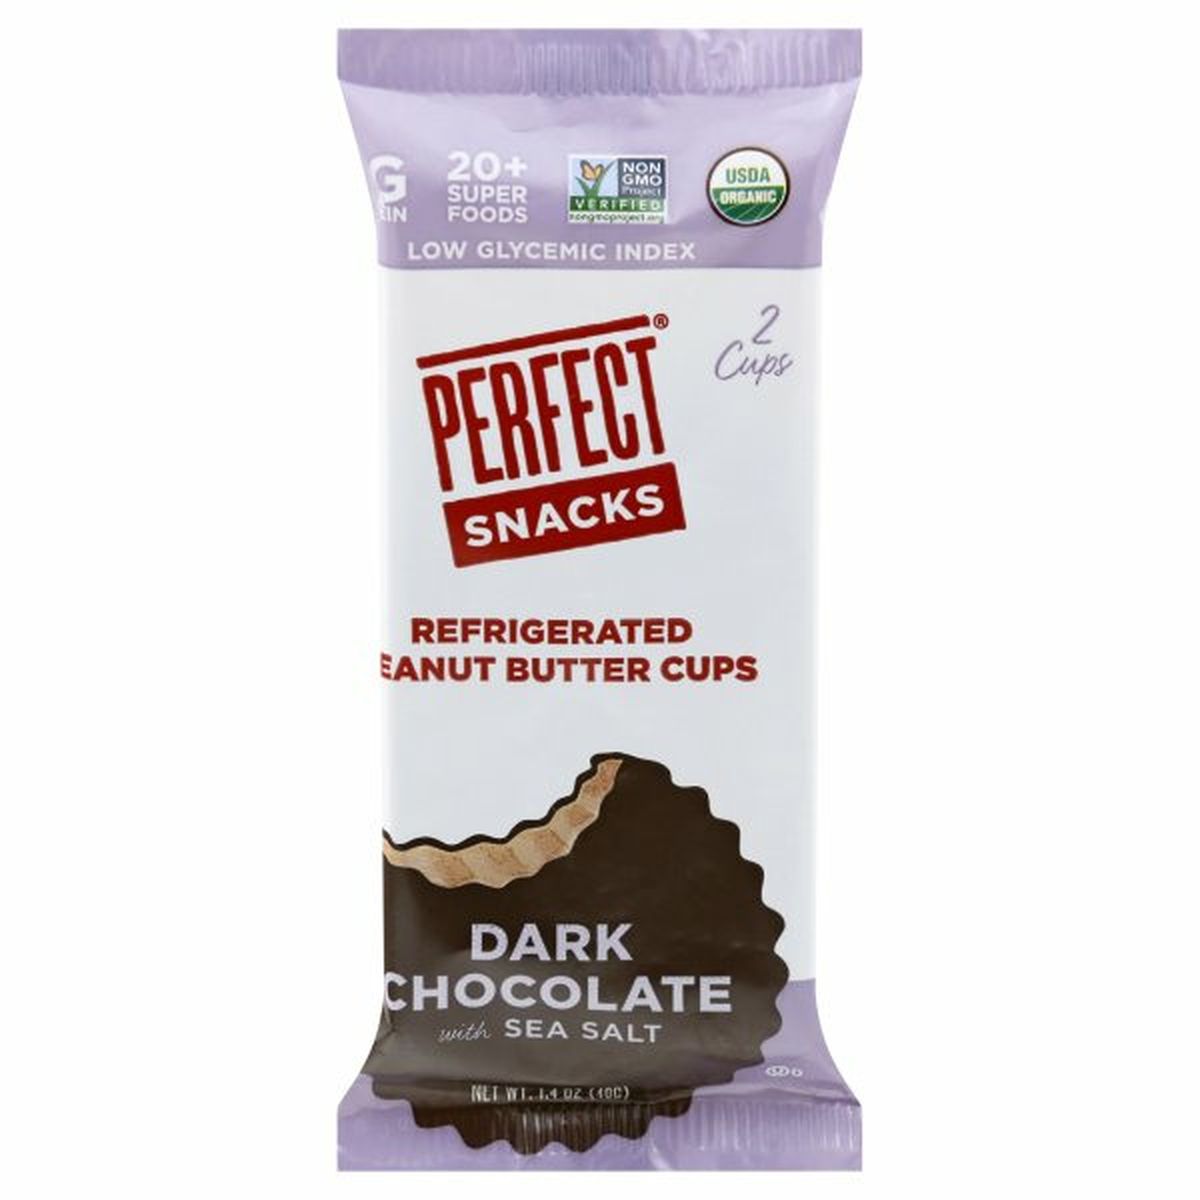 Calories in Perfect Snacks Peanut Butter Cups, Refrigerated, Dark Chocolate with Sea Salt